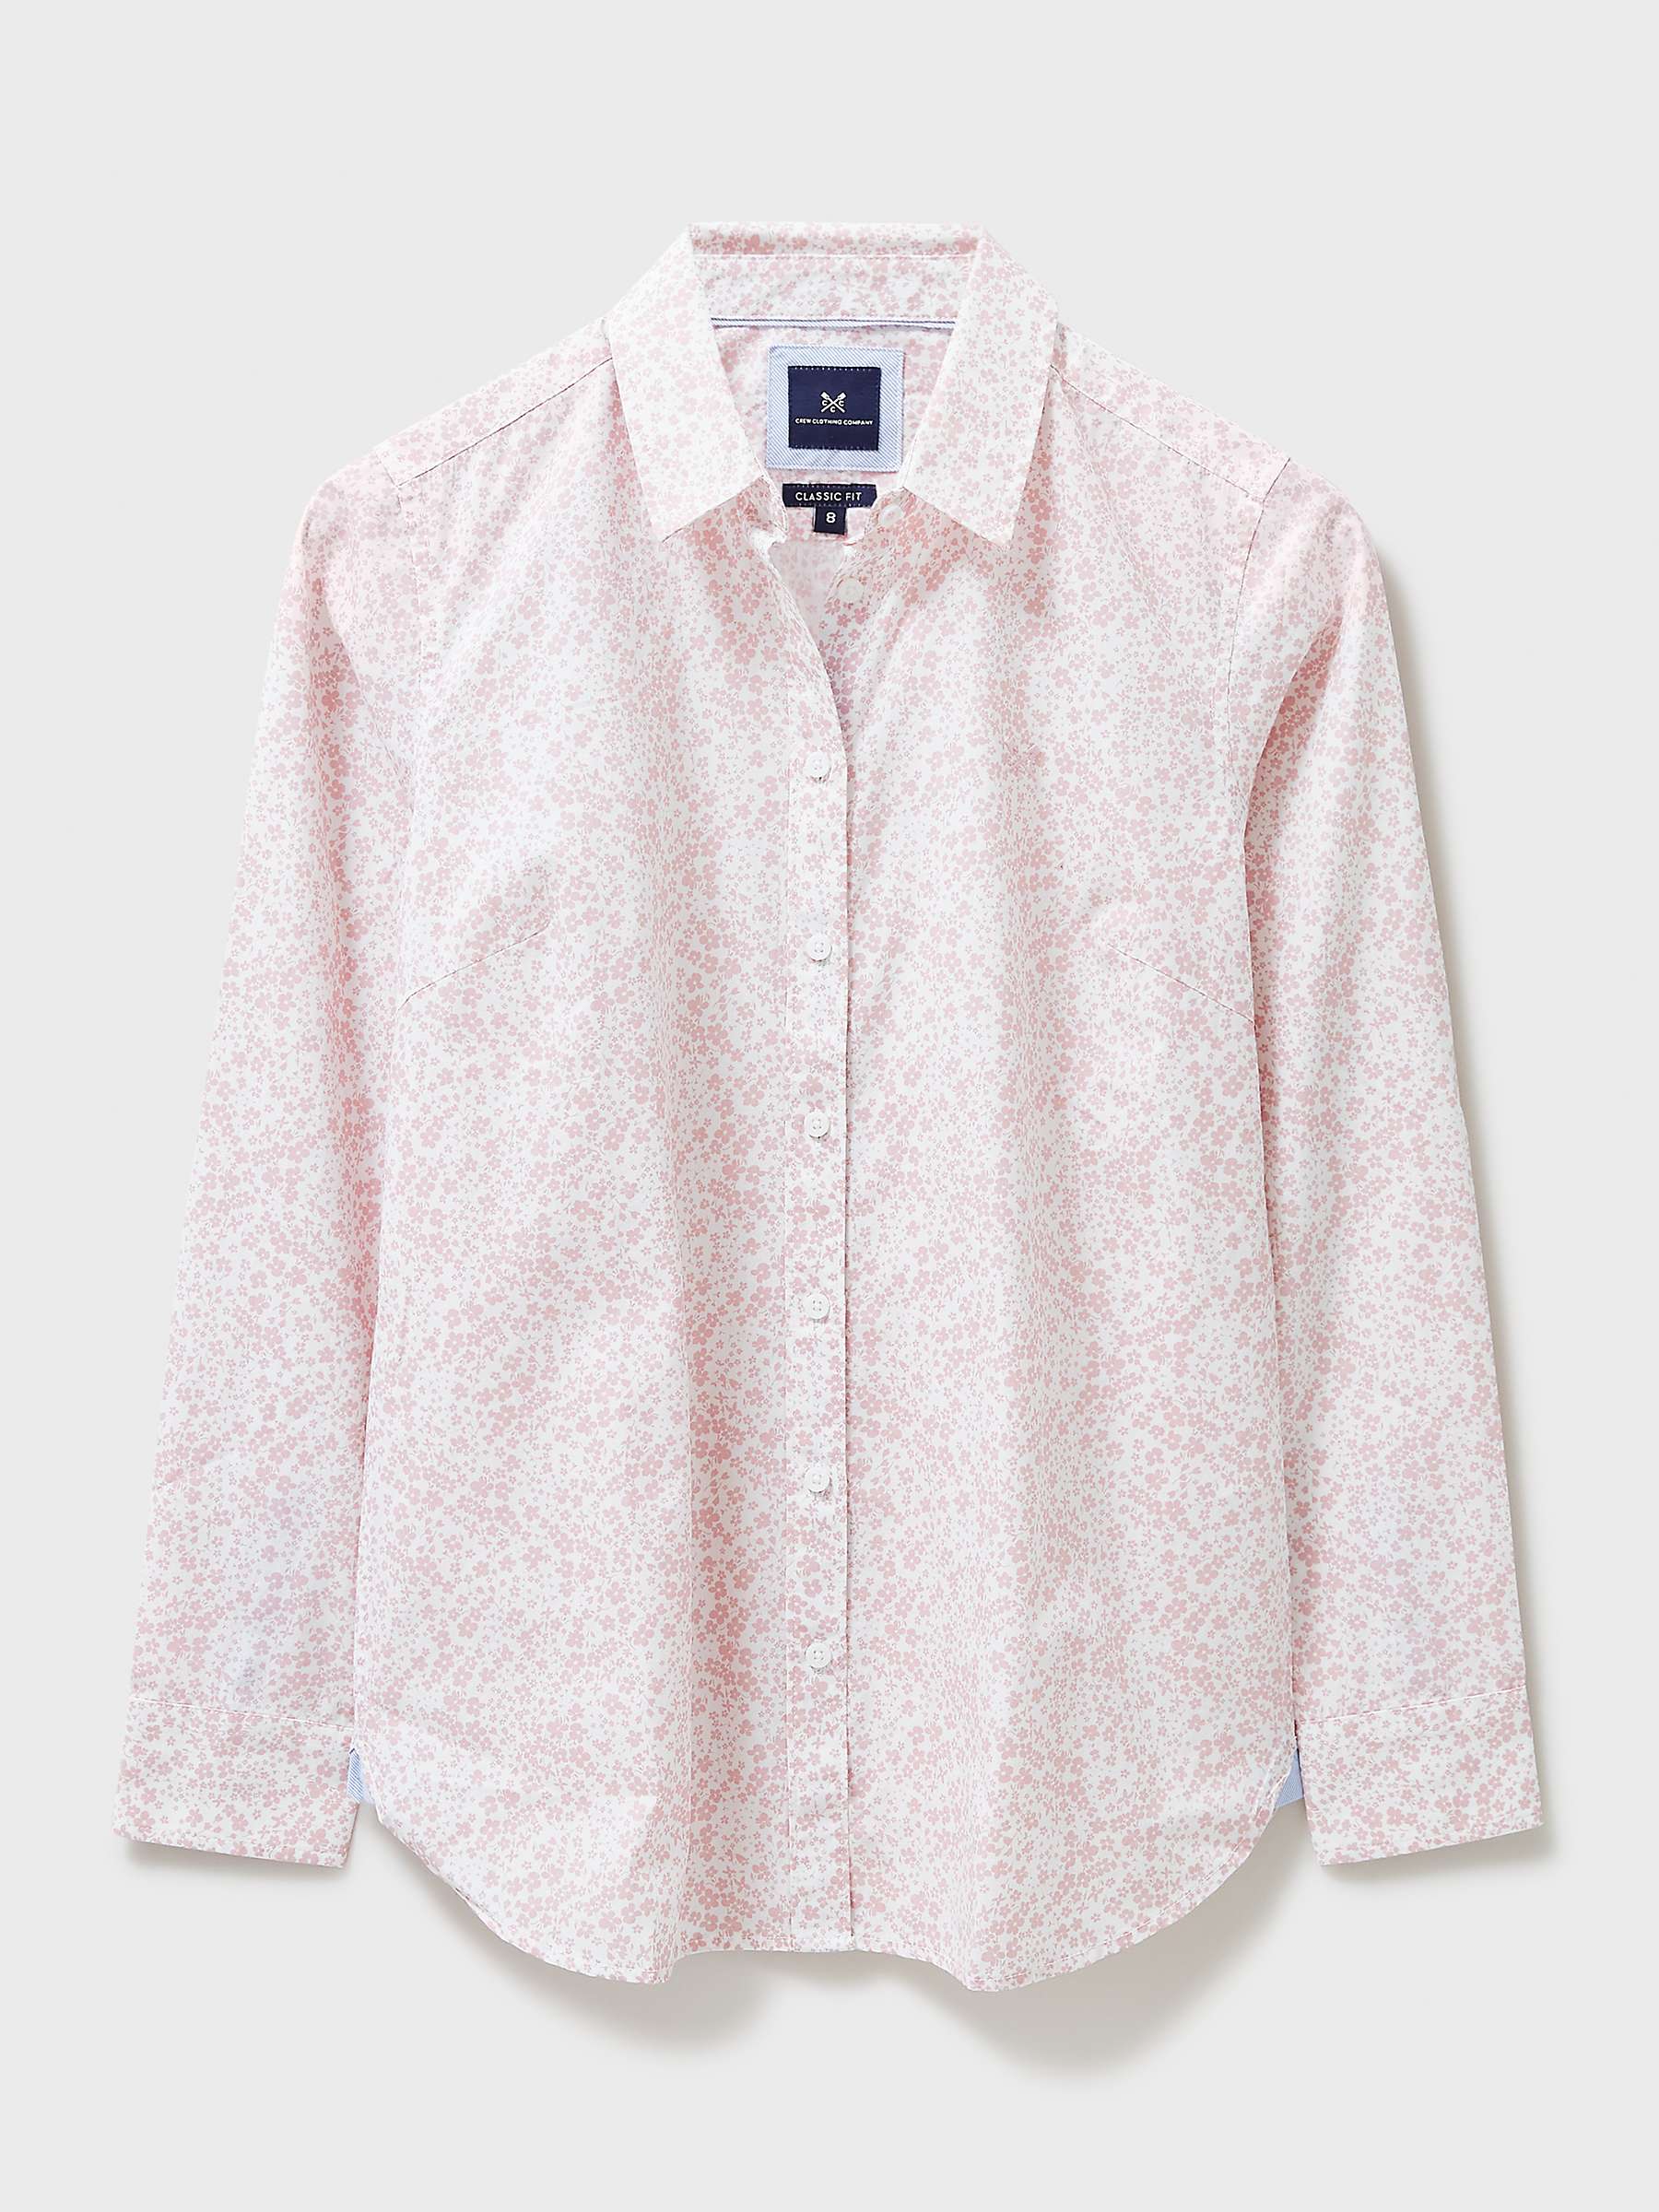 Buy Crew Clothing Lulworth Tailored Floral Shirt, White/Pink Online at johnlewis.com